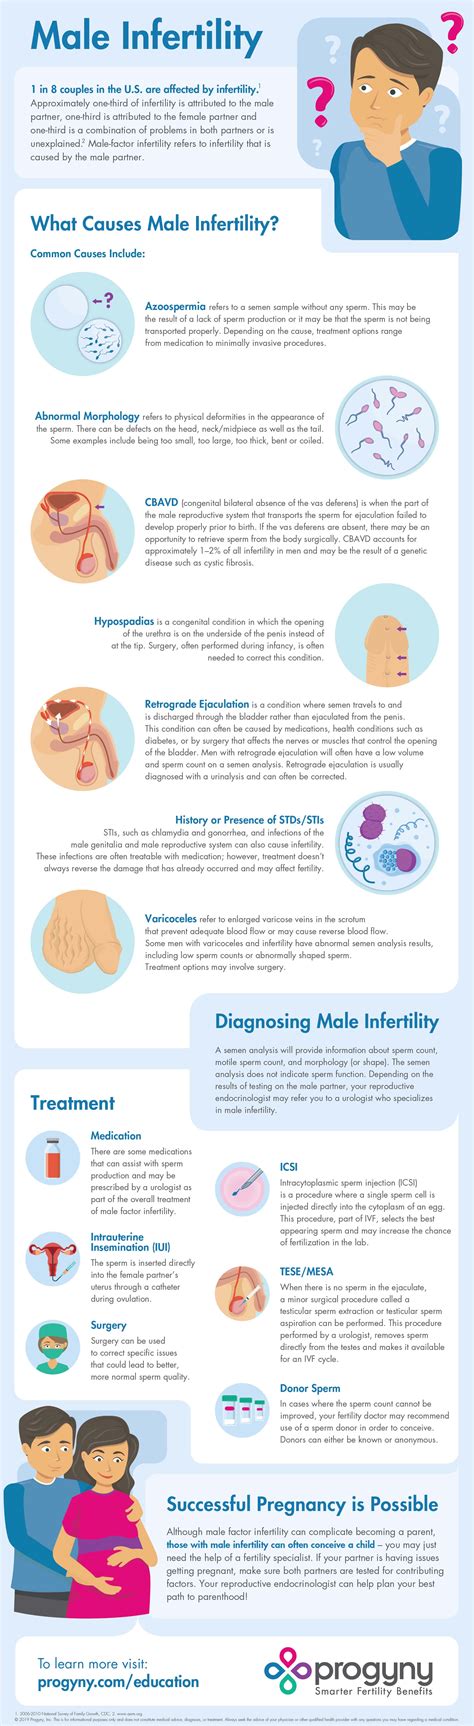 how to get pregnant male infertility